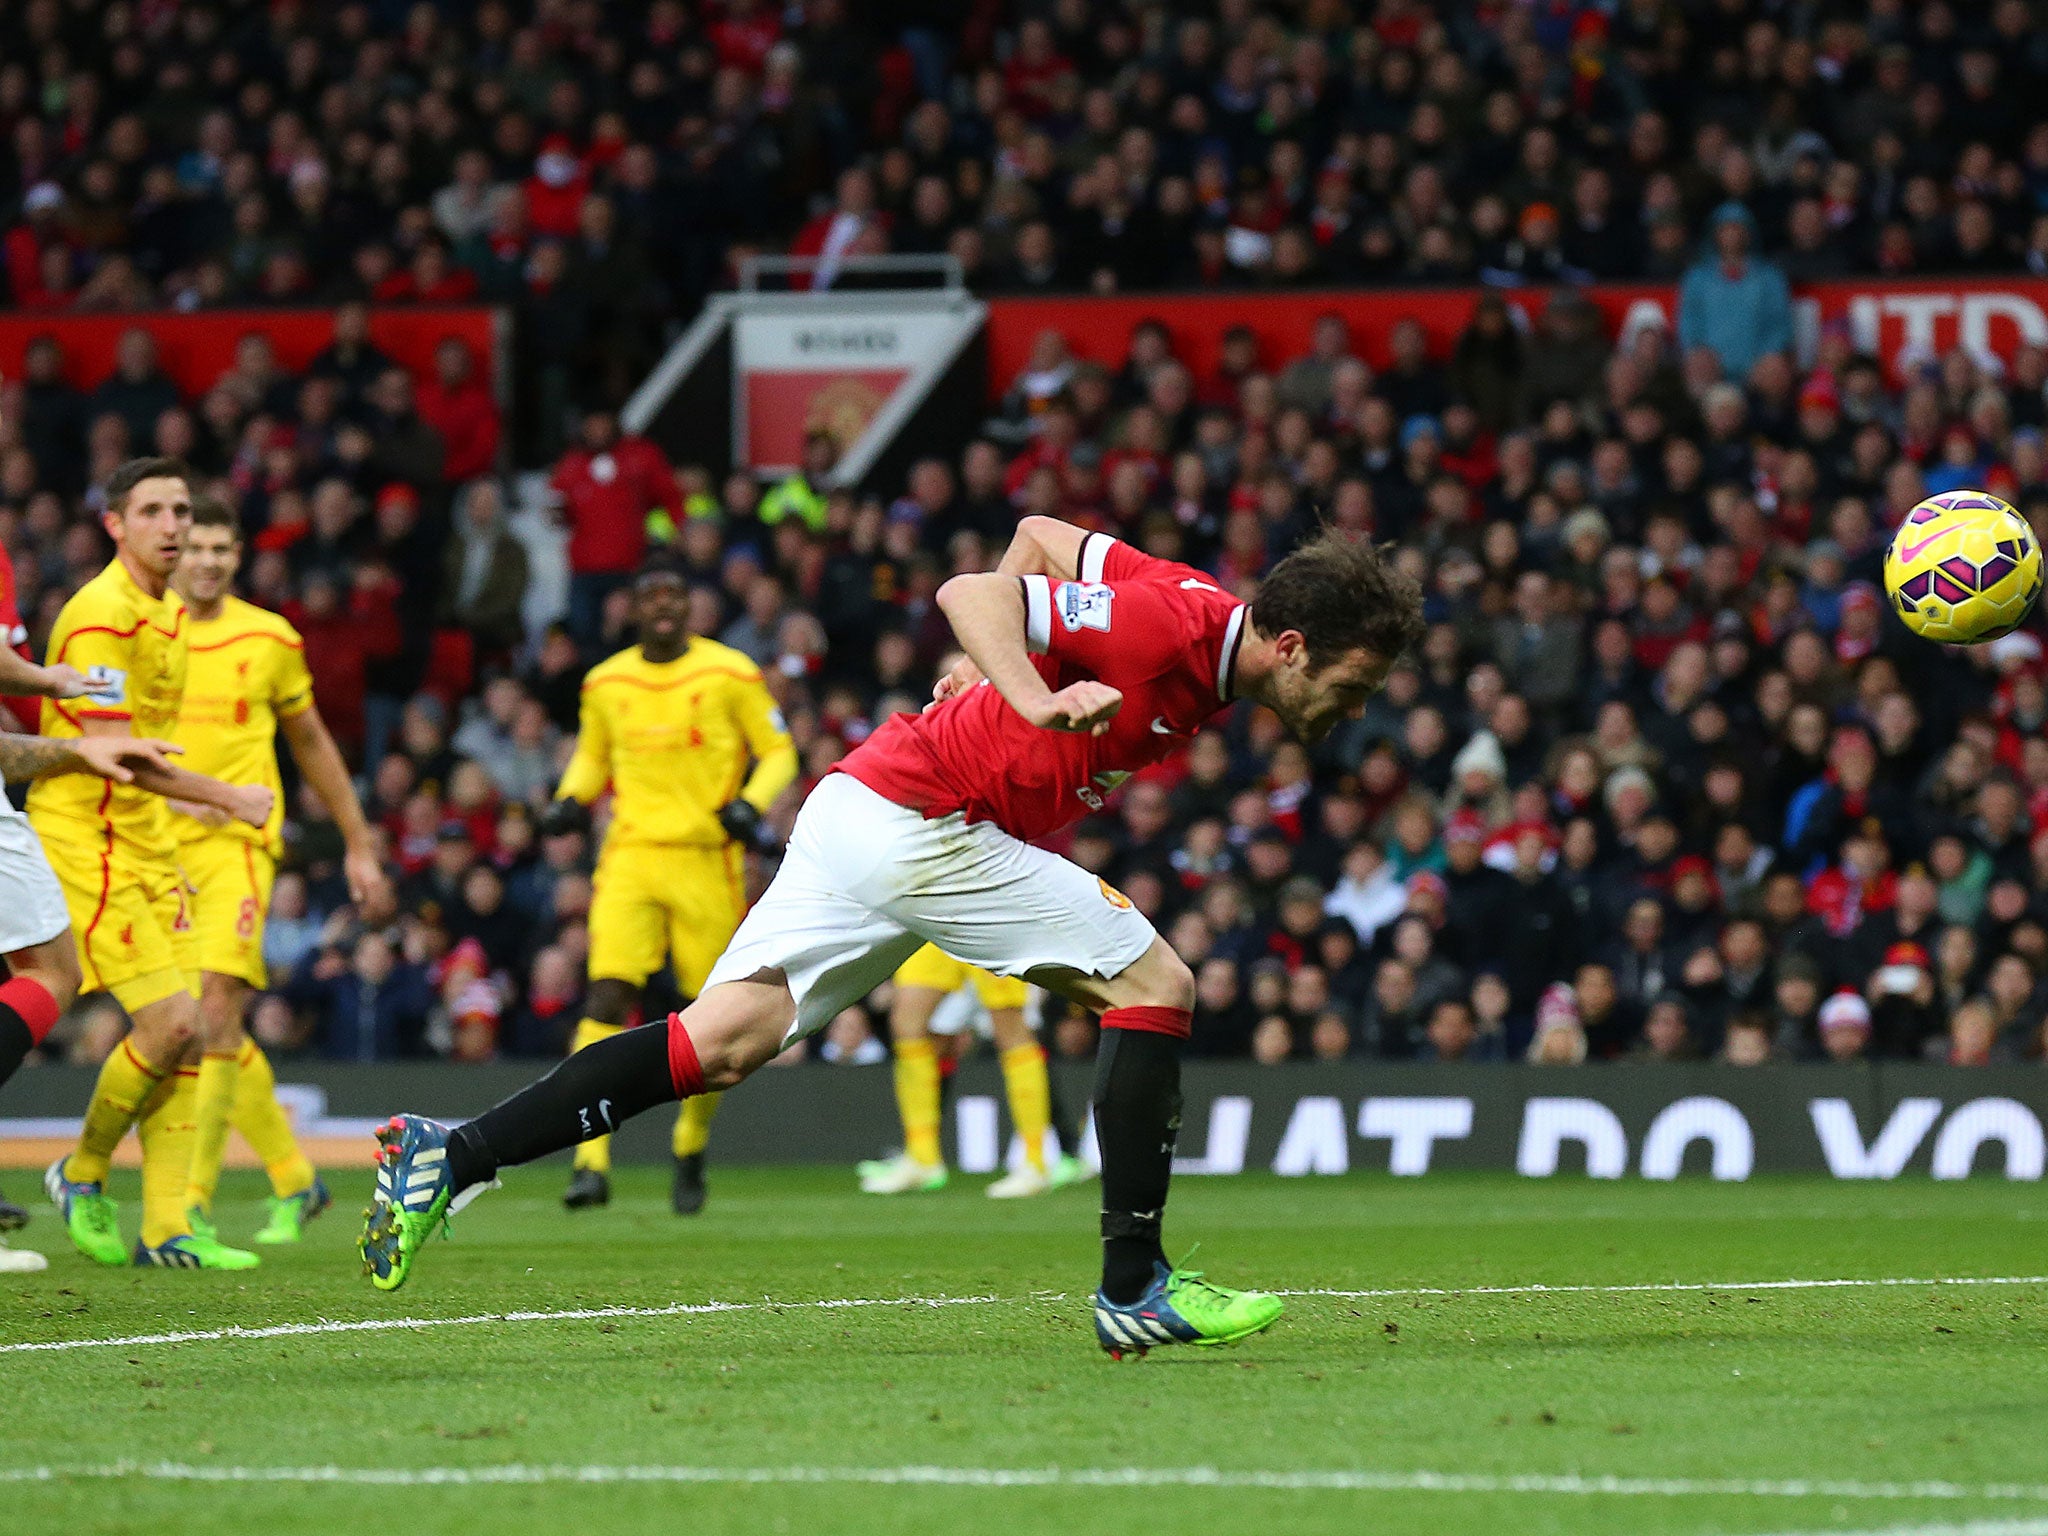 Mata heads United two-up in controversial circumstances